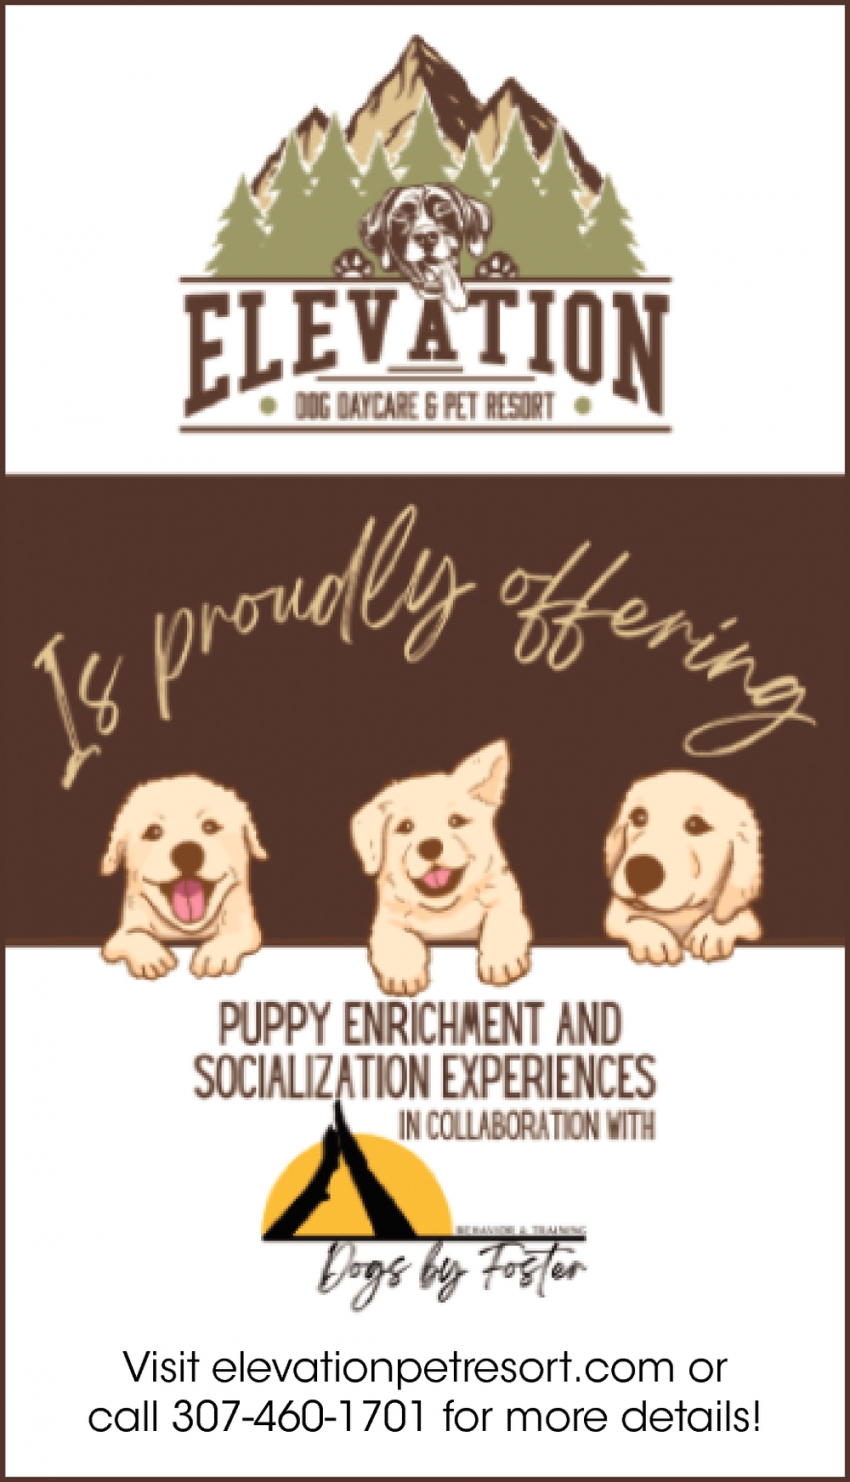 Puppy Enrichment and Socialization Experiences